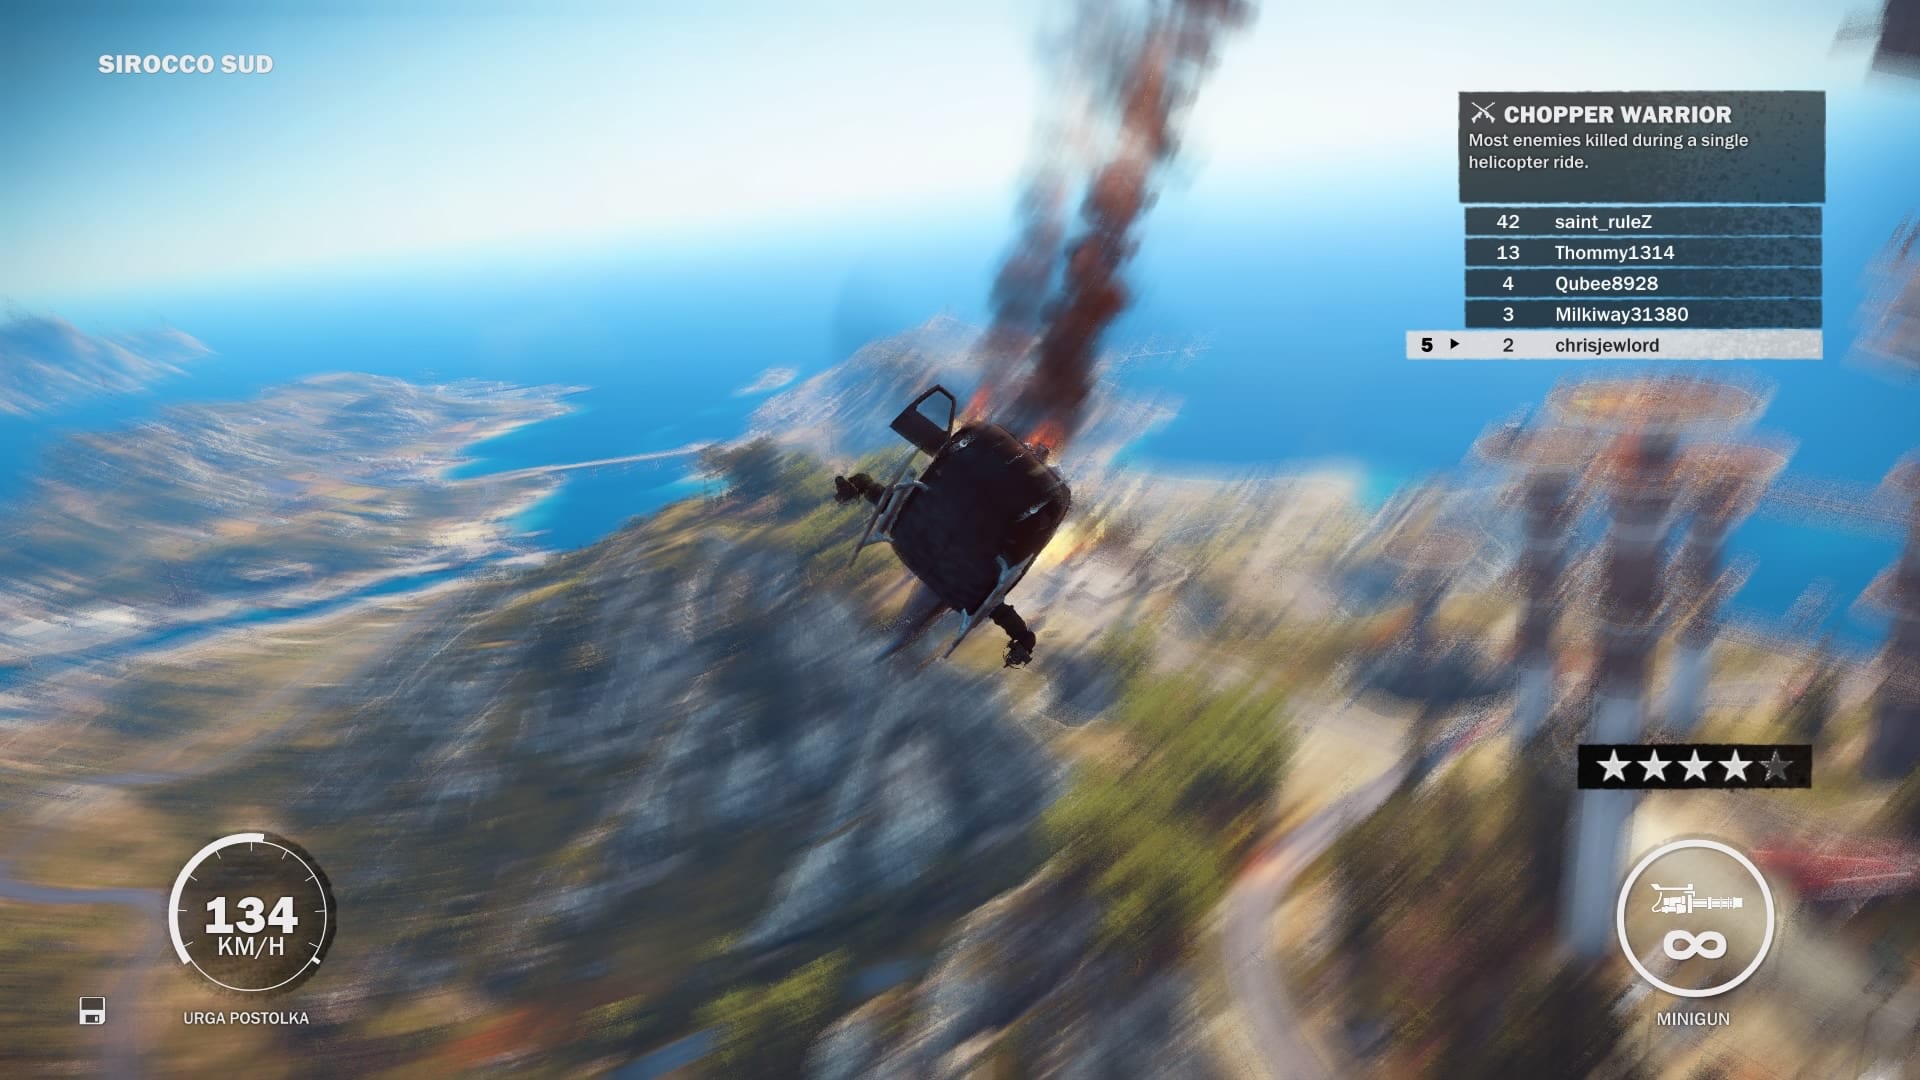 Rico doesn’t have a pilot’s license. Can you tell?